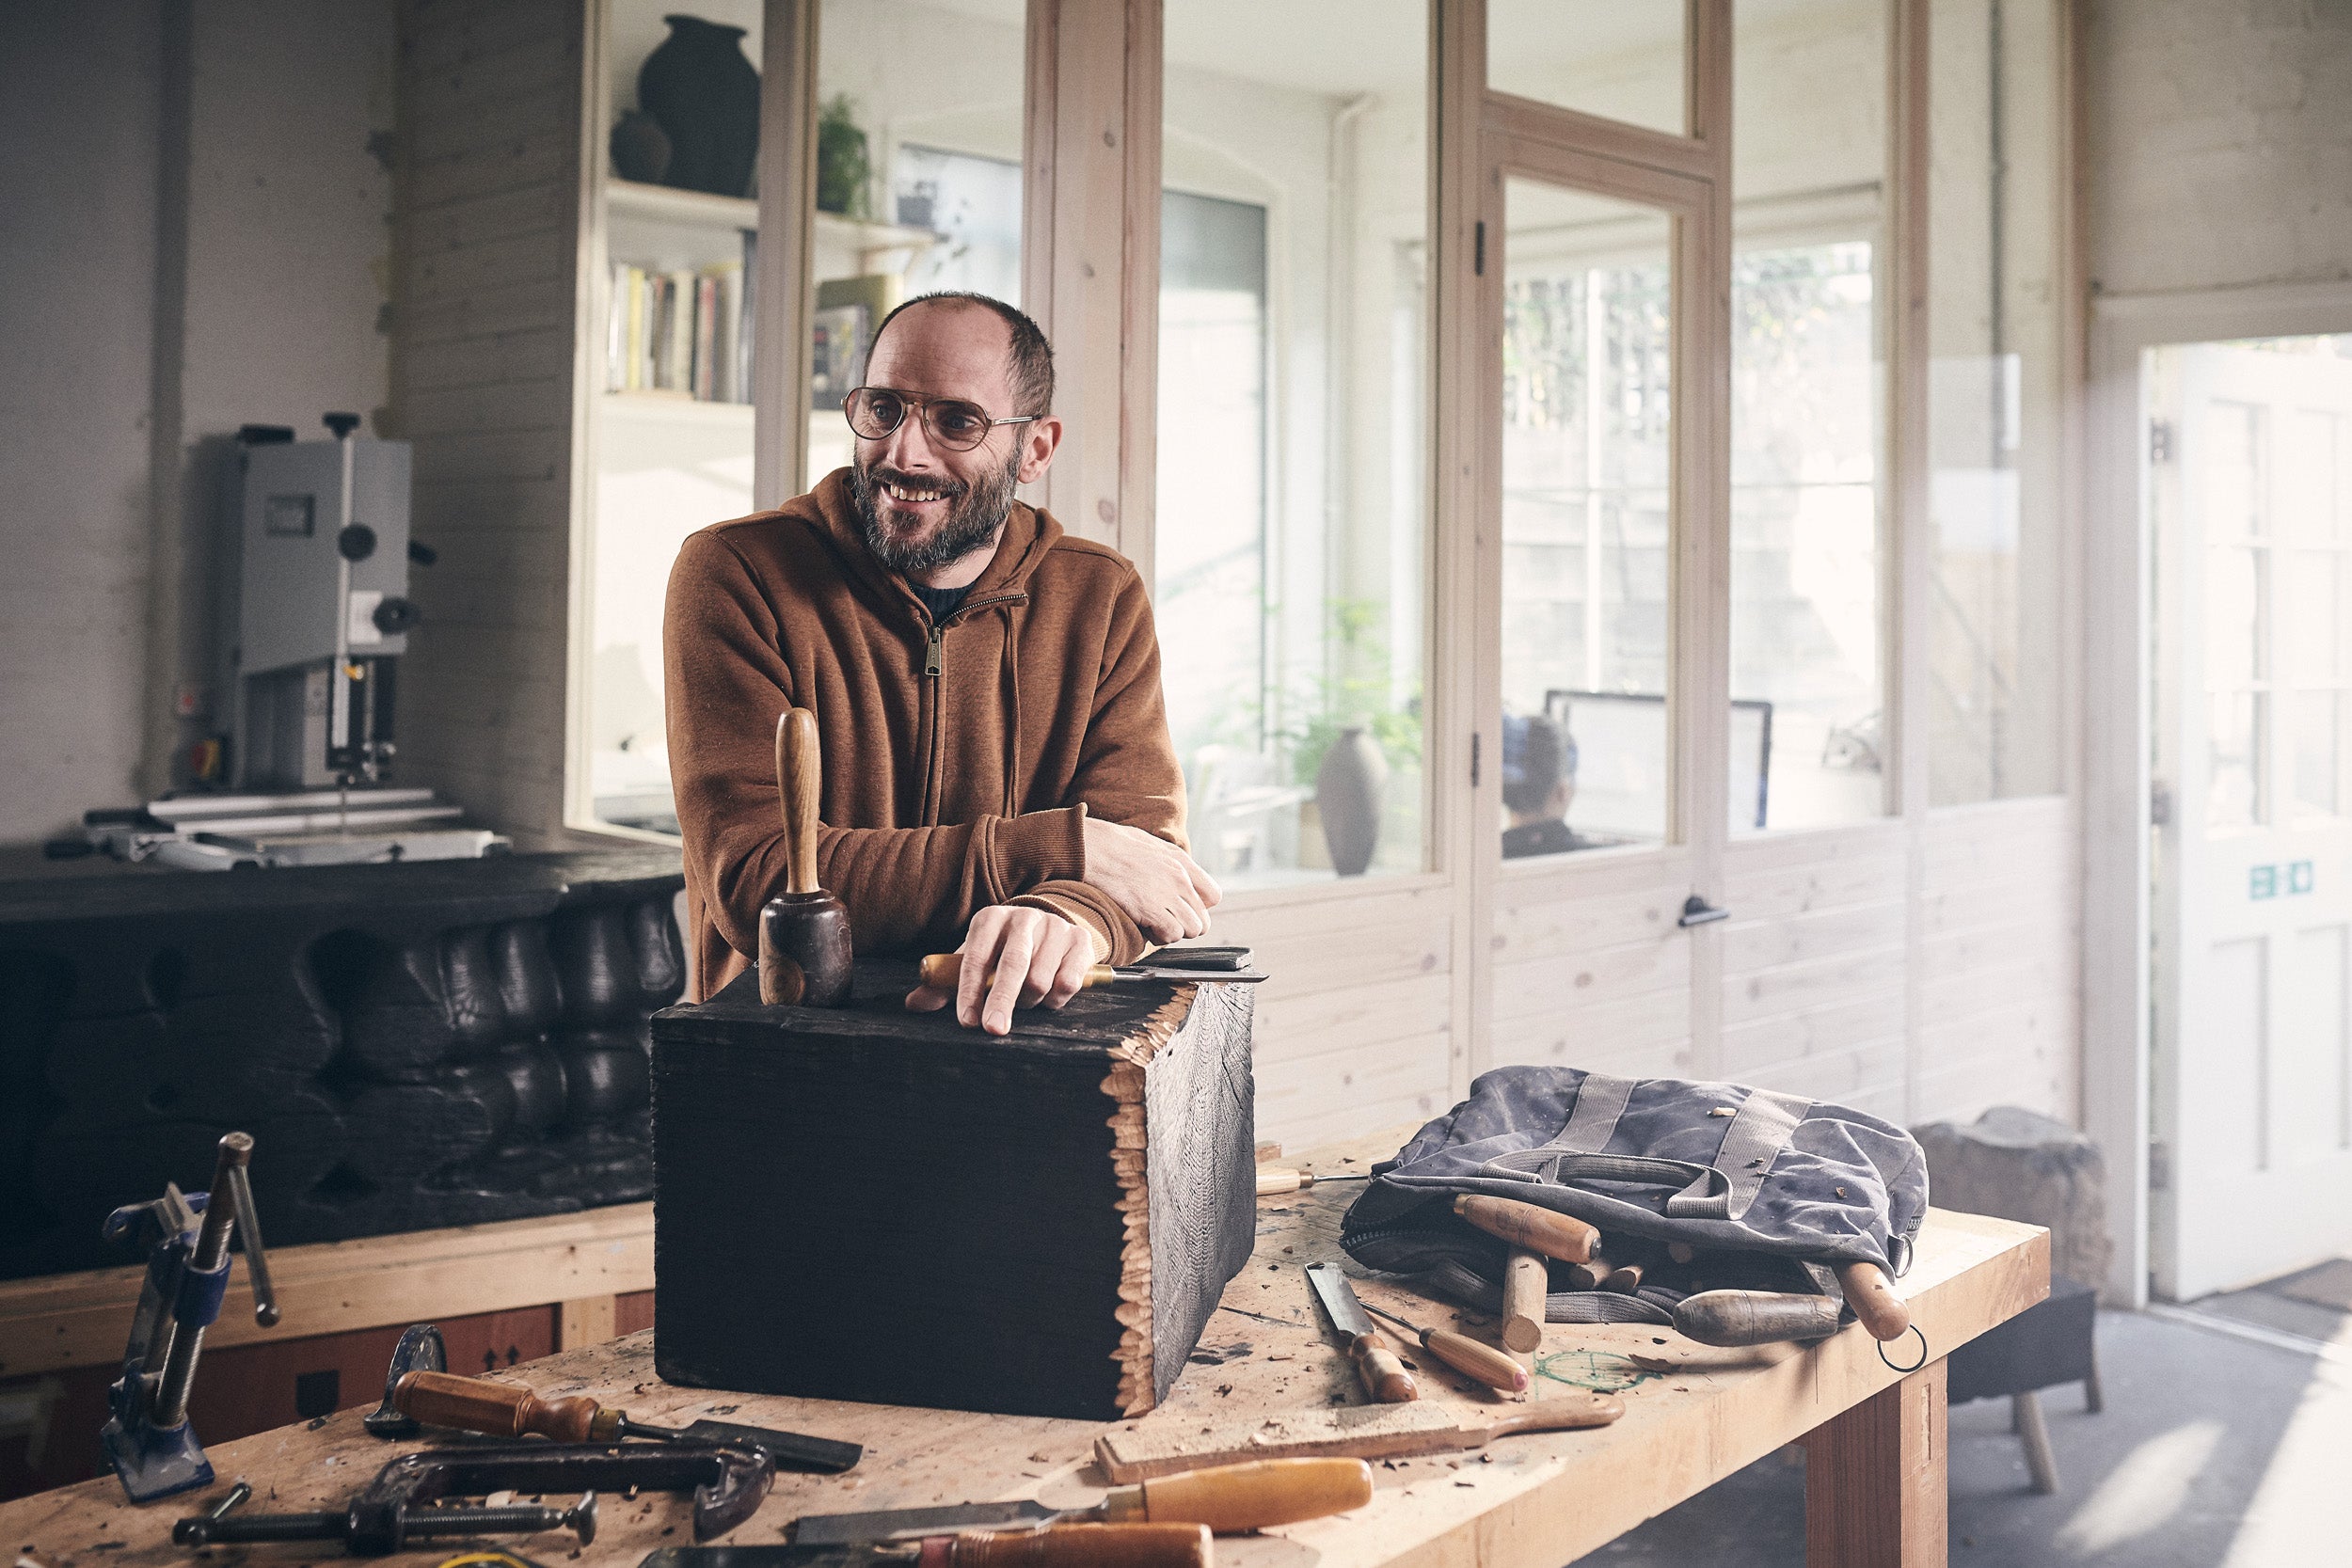 Gareth Neal collaborates with some of the UK’s top craftspeople